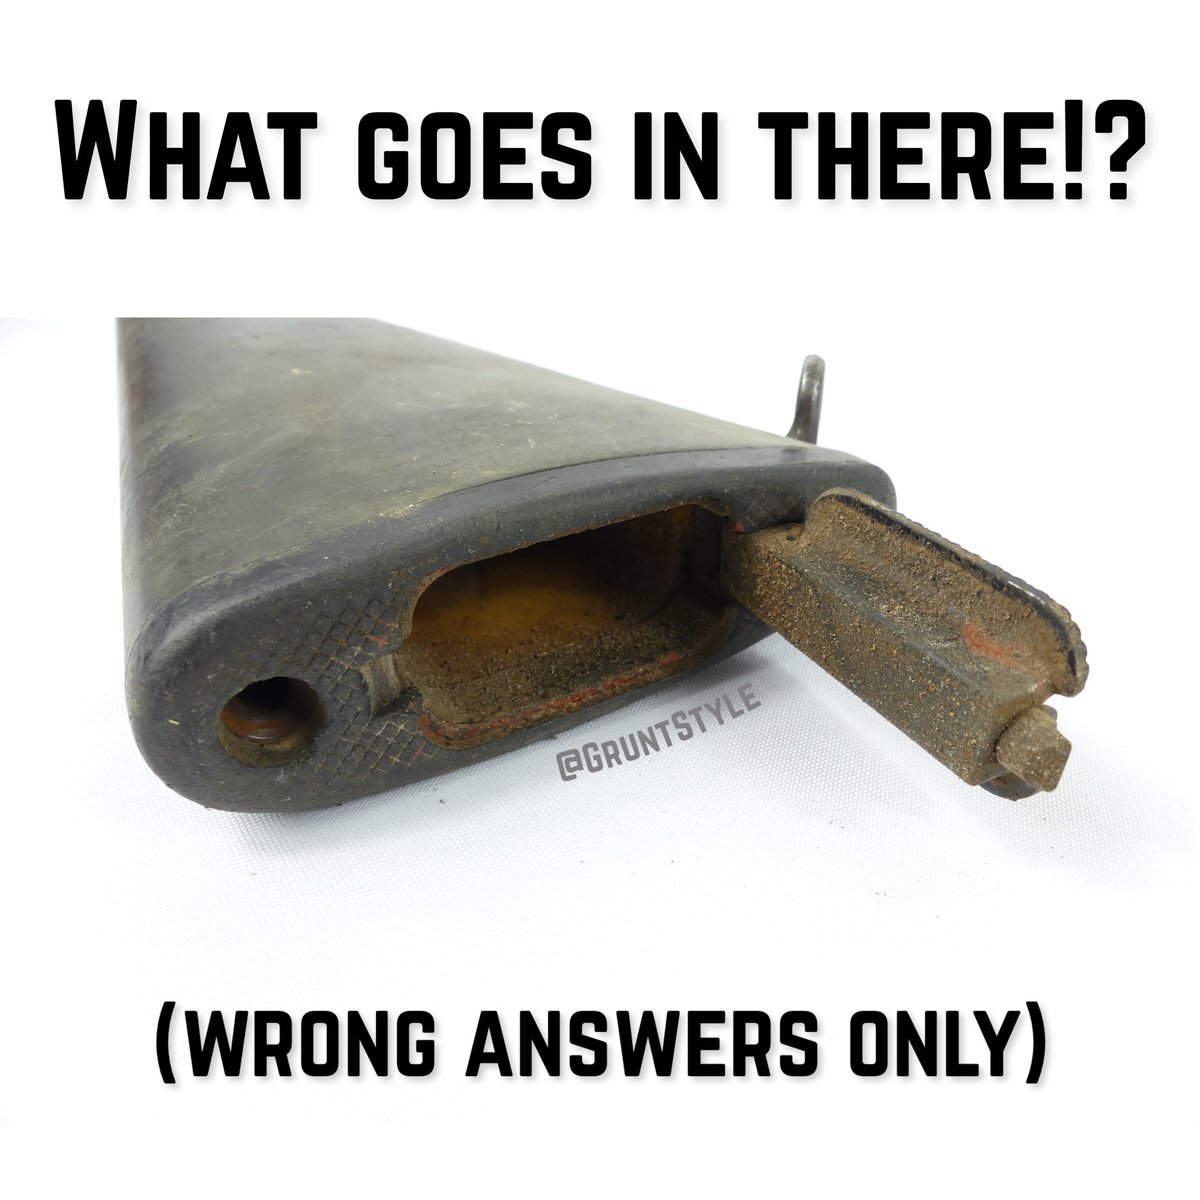 WHAT IS THIS?! WRONG ANSWERS ONLY!!! #wronganswersonly #wronganswers #meme #funny #military #viral #trending #quizzes #quiz gruntstyle.com